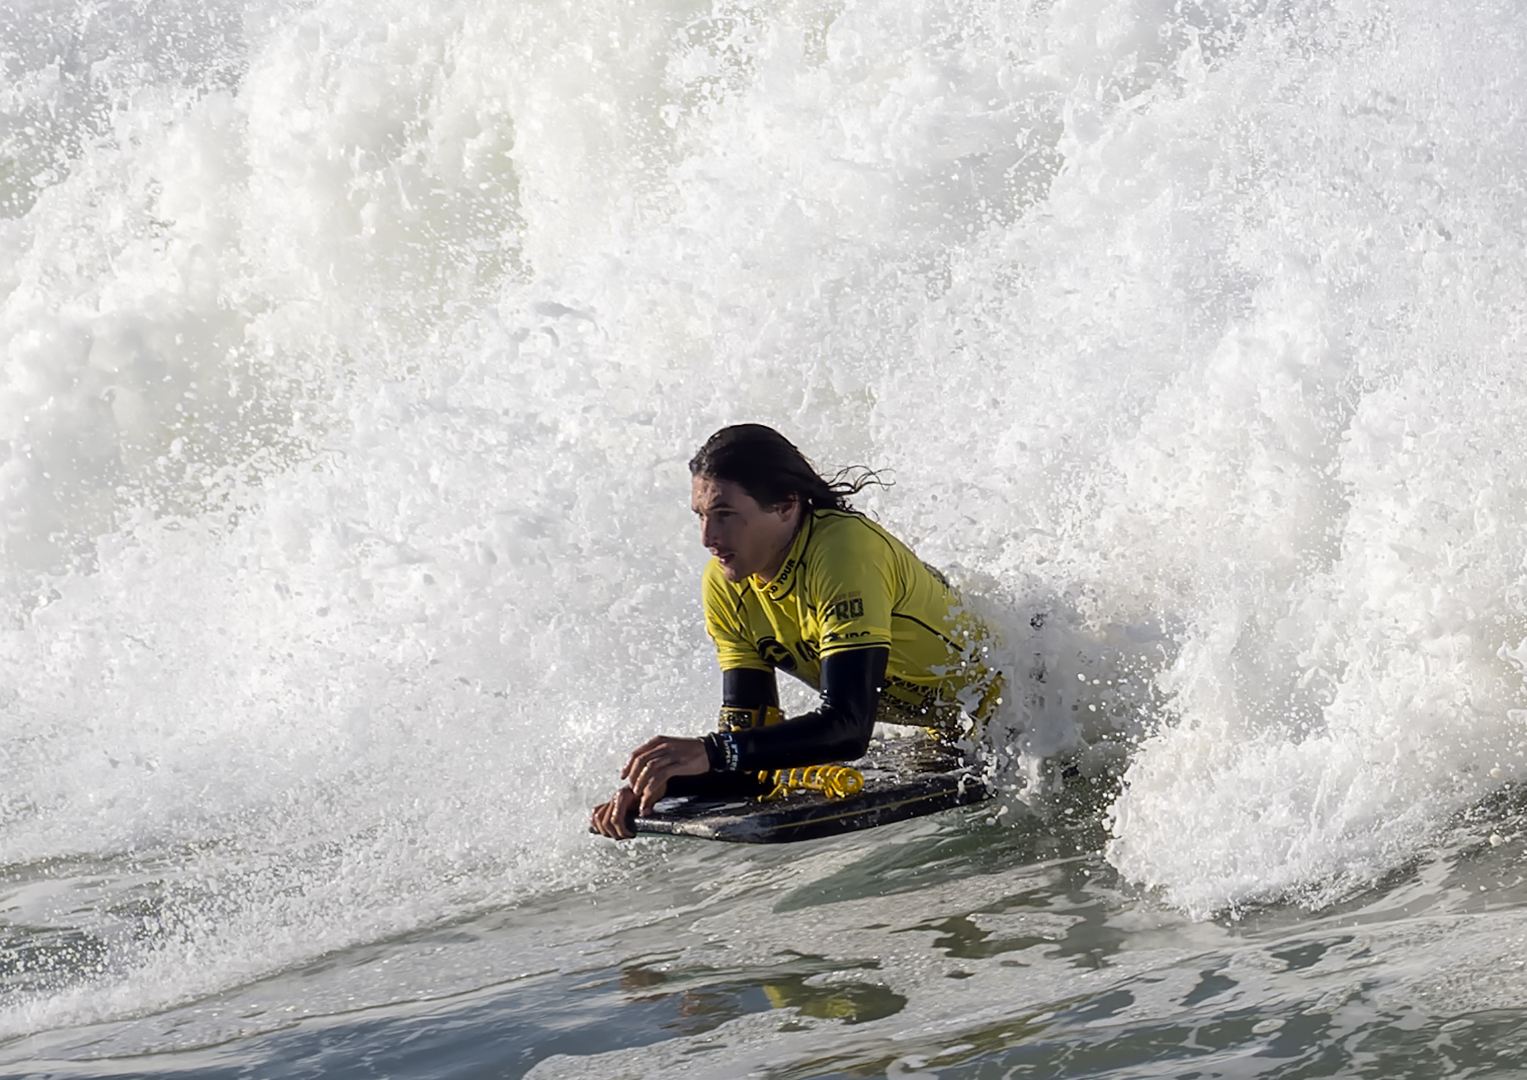 Bodyboarding World Tour provides for sport in action shots